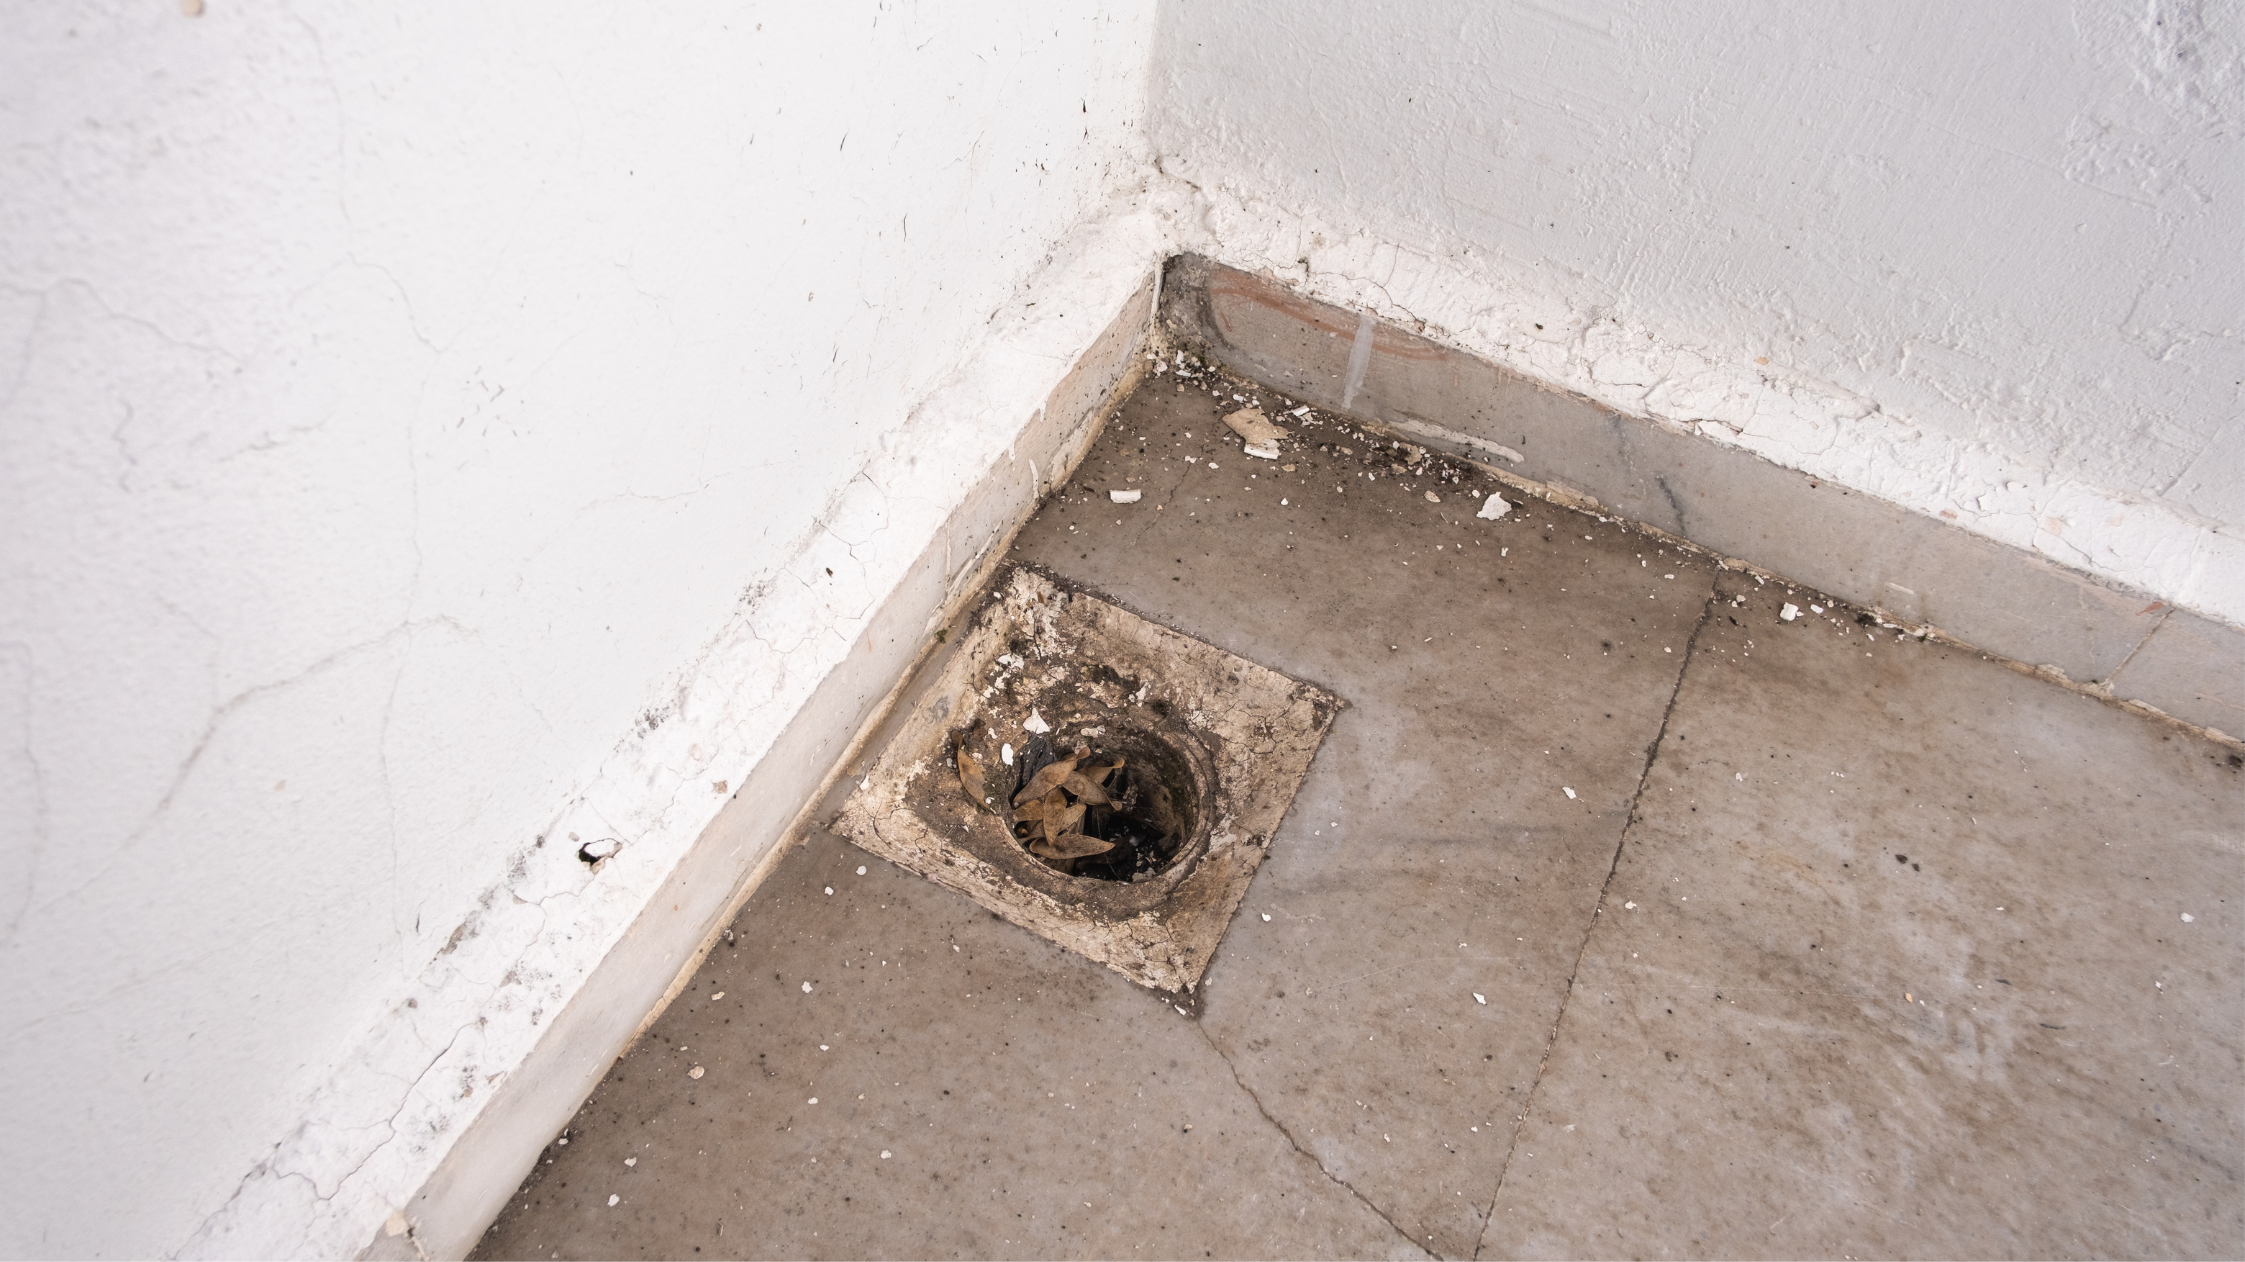 Blocked drains and their impact